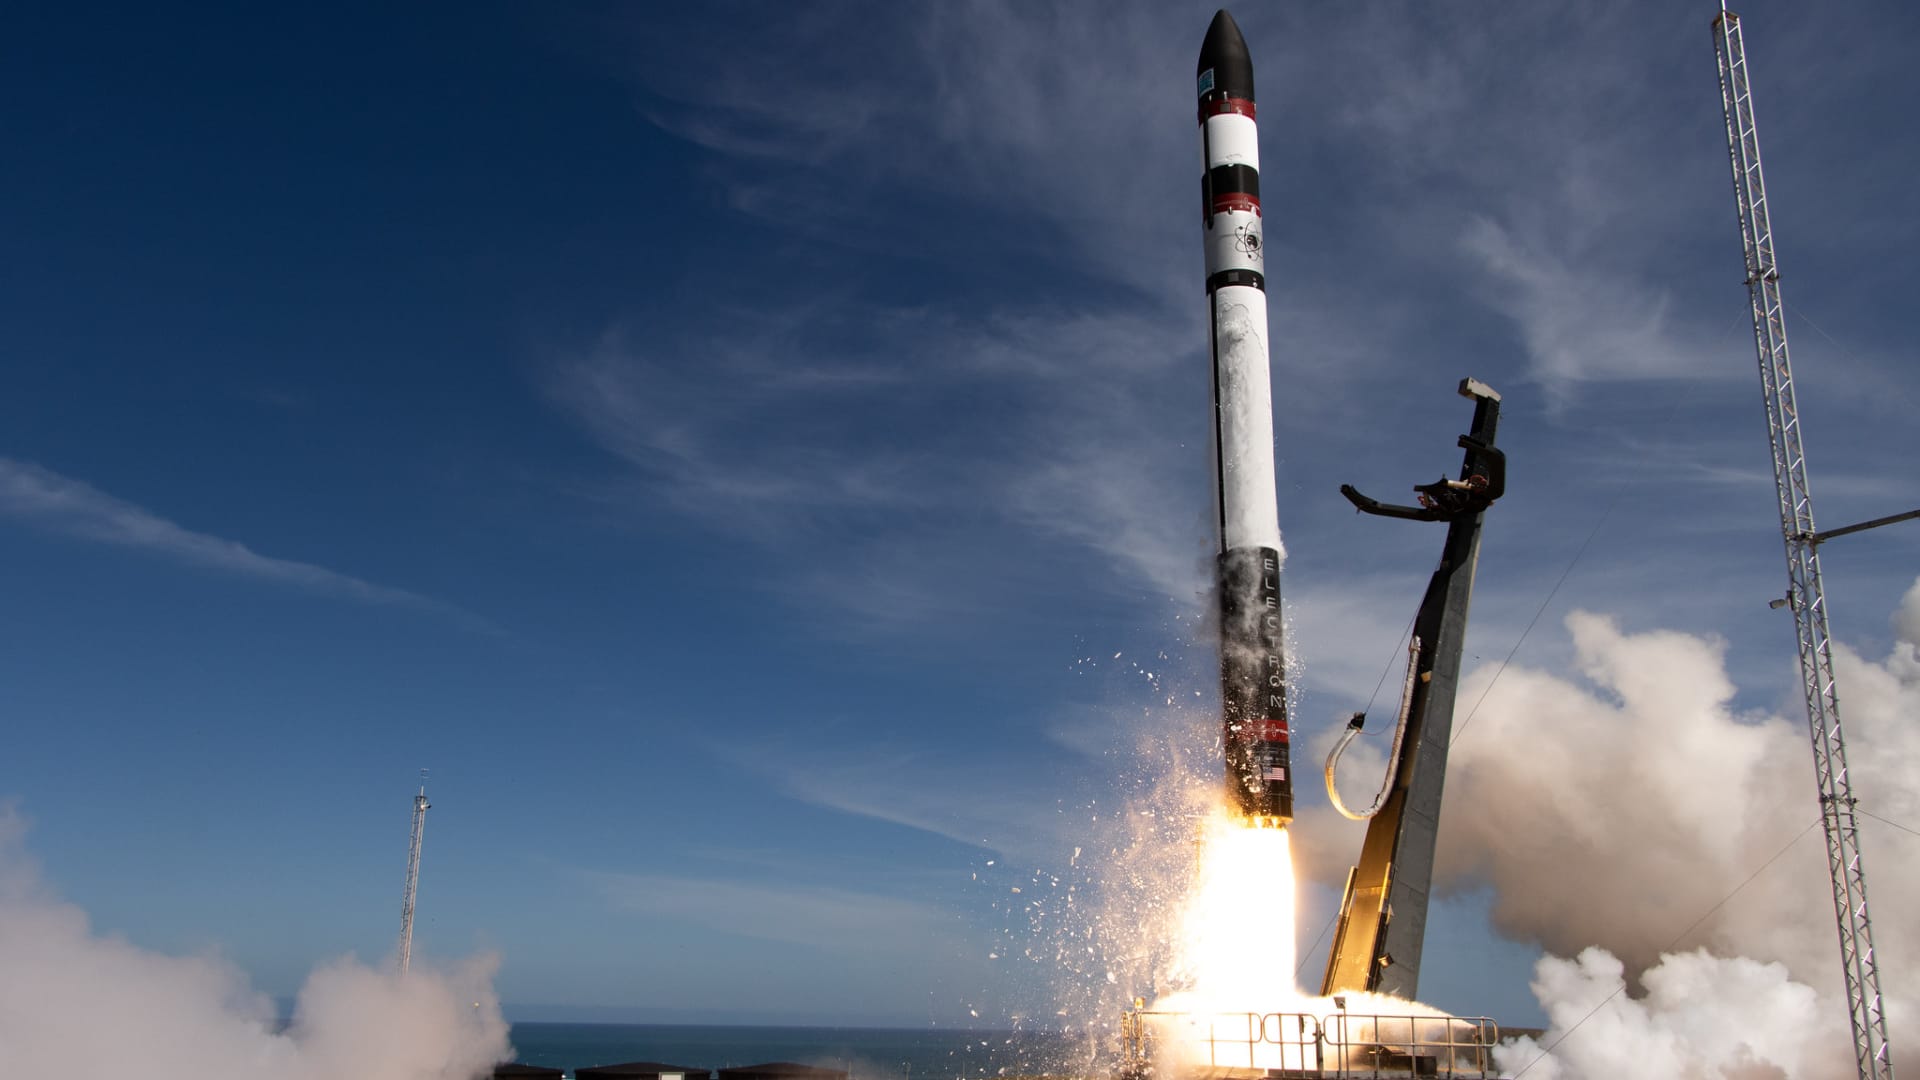 The 16th Electron launch in November 2020, when the company recovered the rocket after splashdown for the first time.